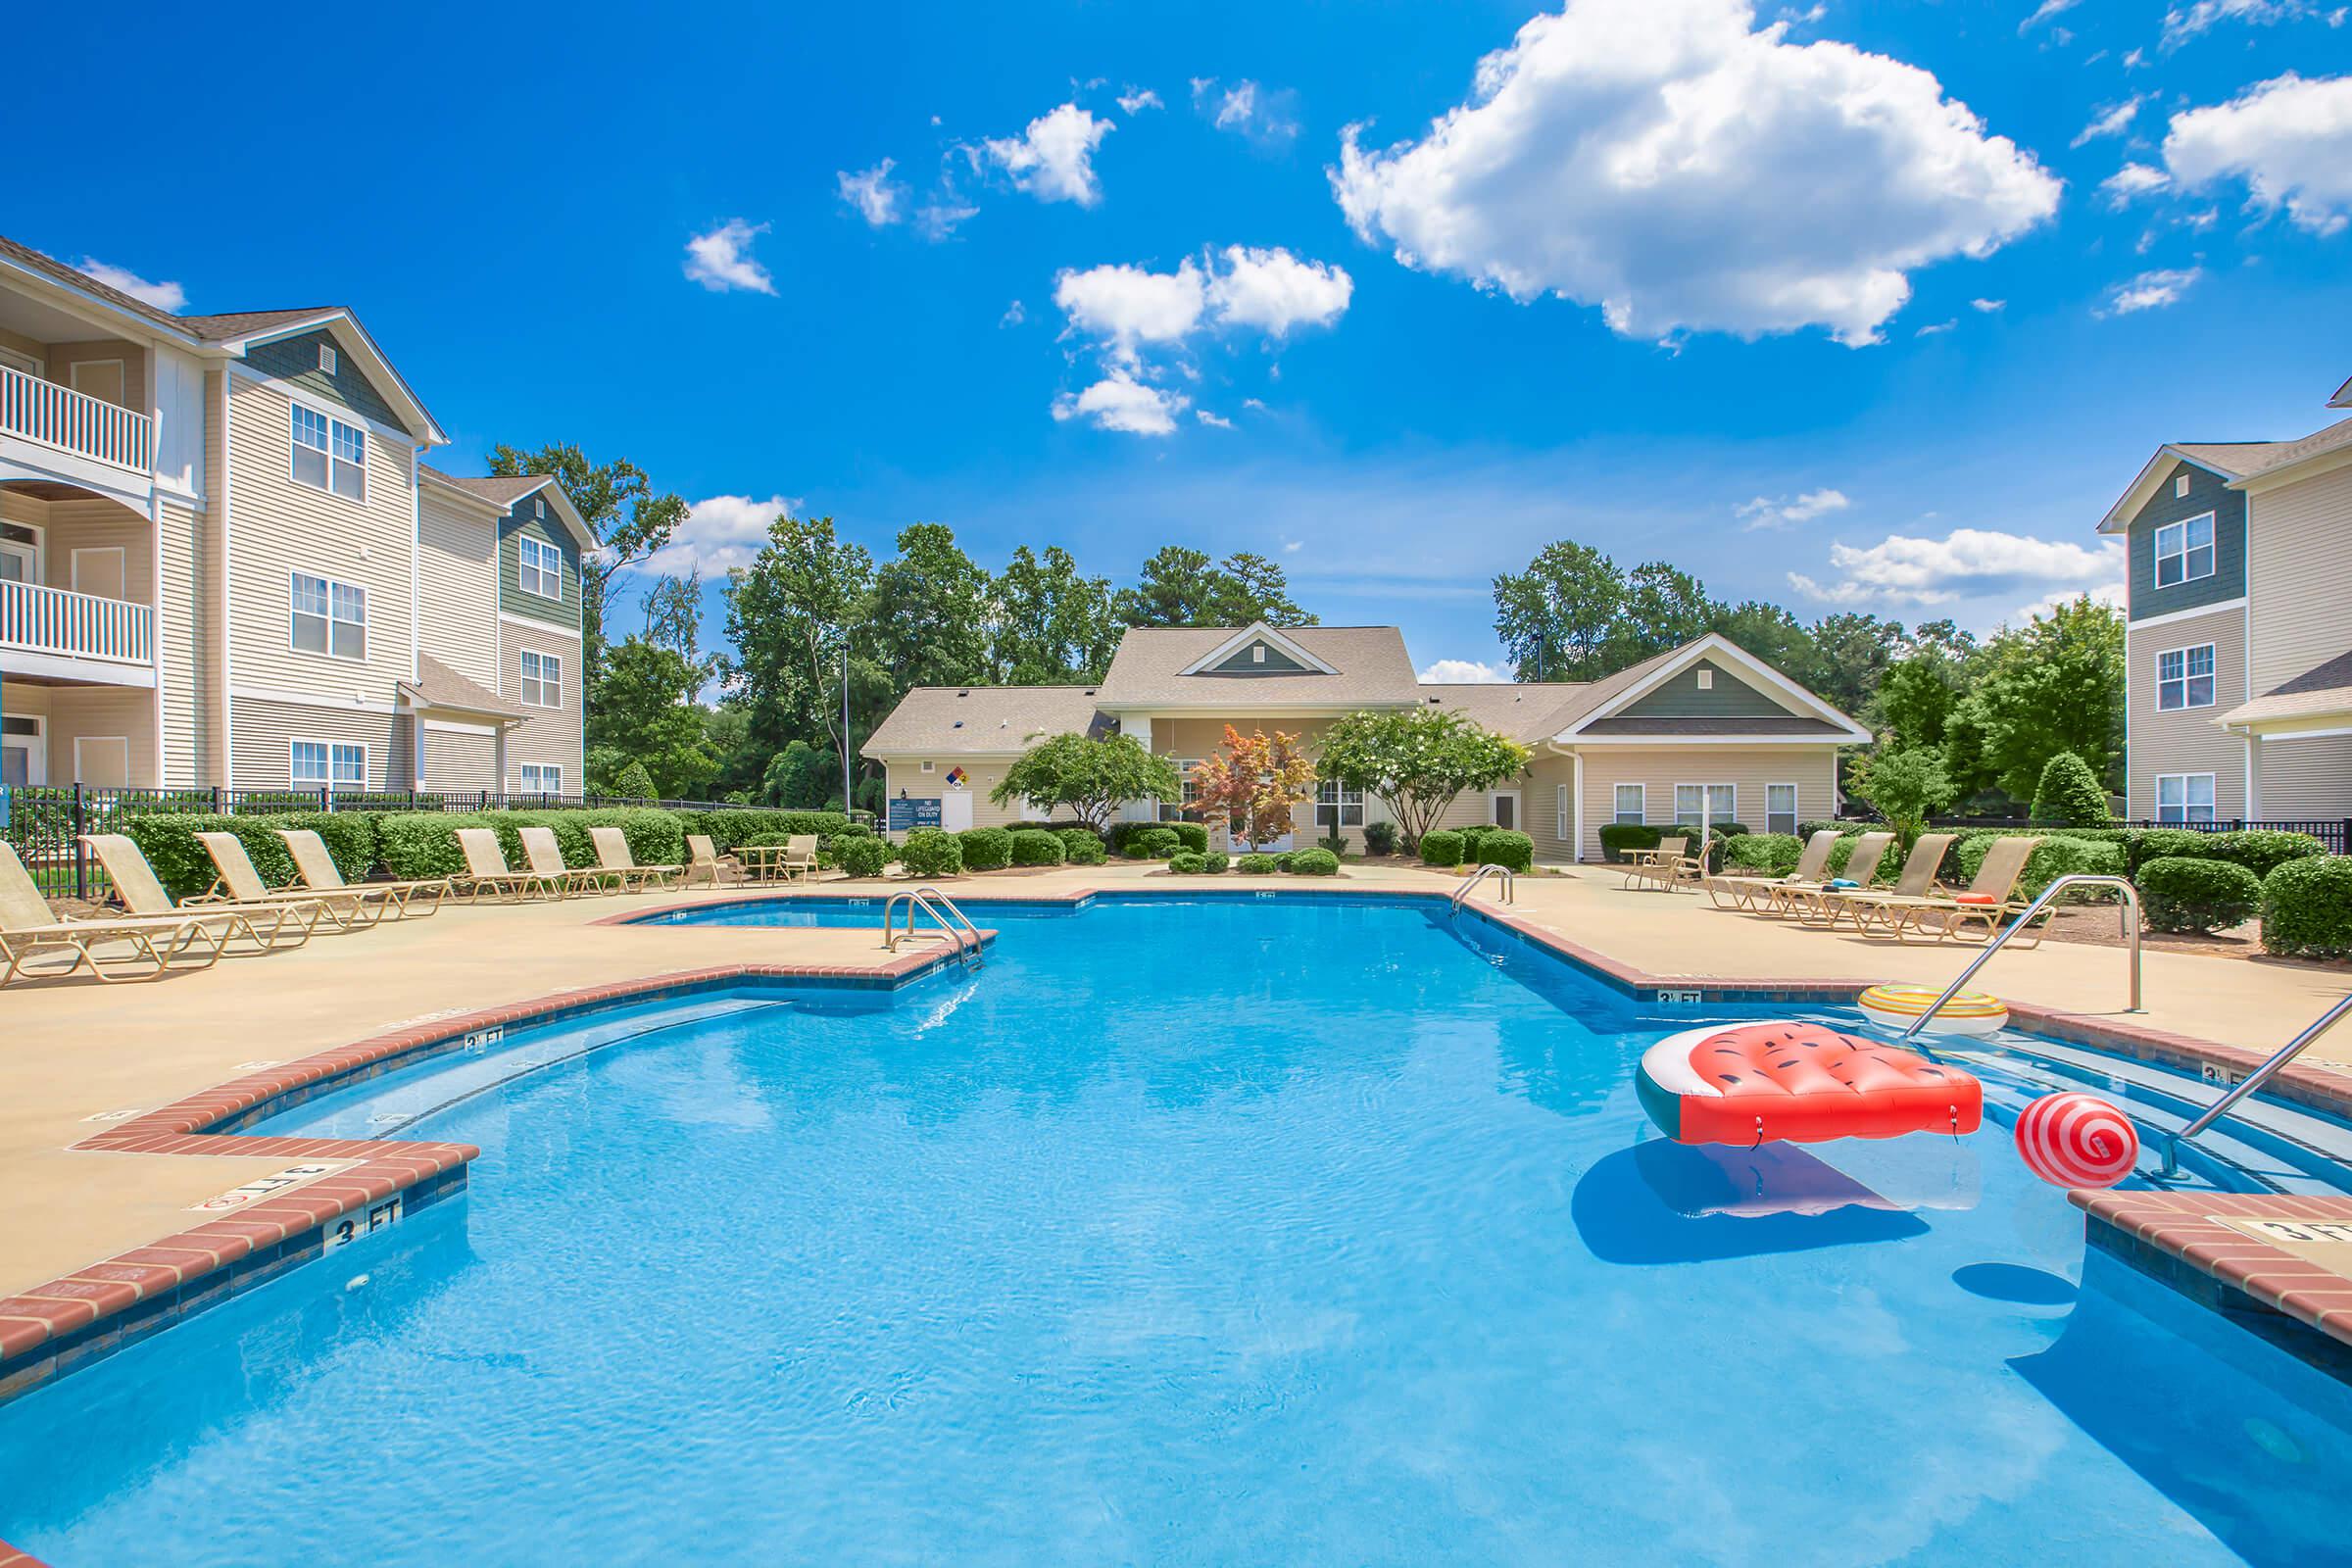 Hang out by the poolside at Whisper Creek in Rock Hill, South Carolina.